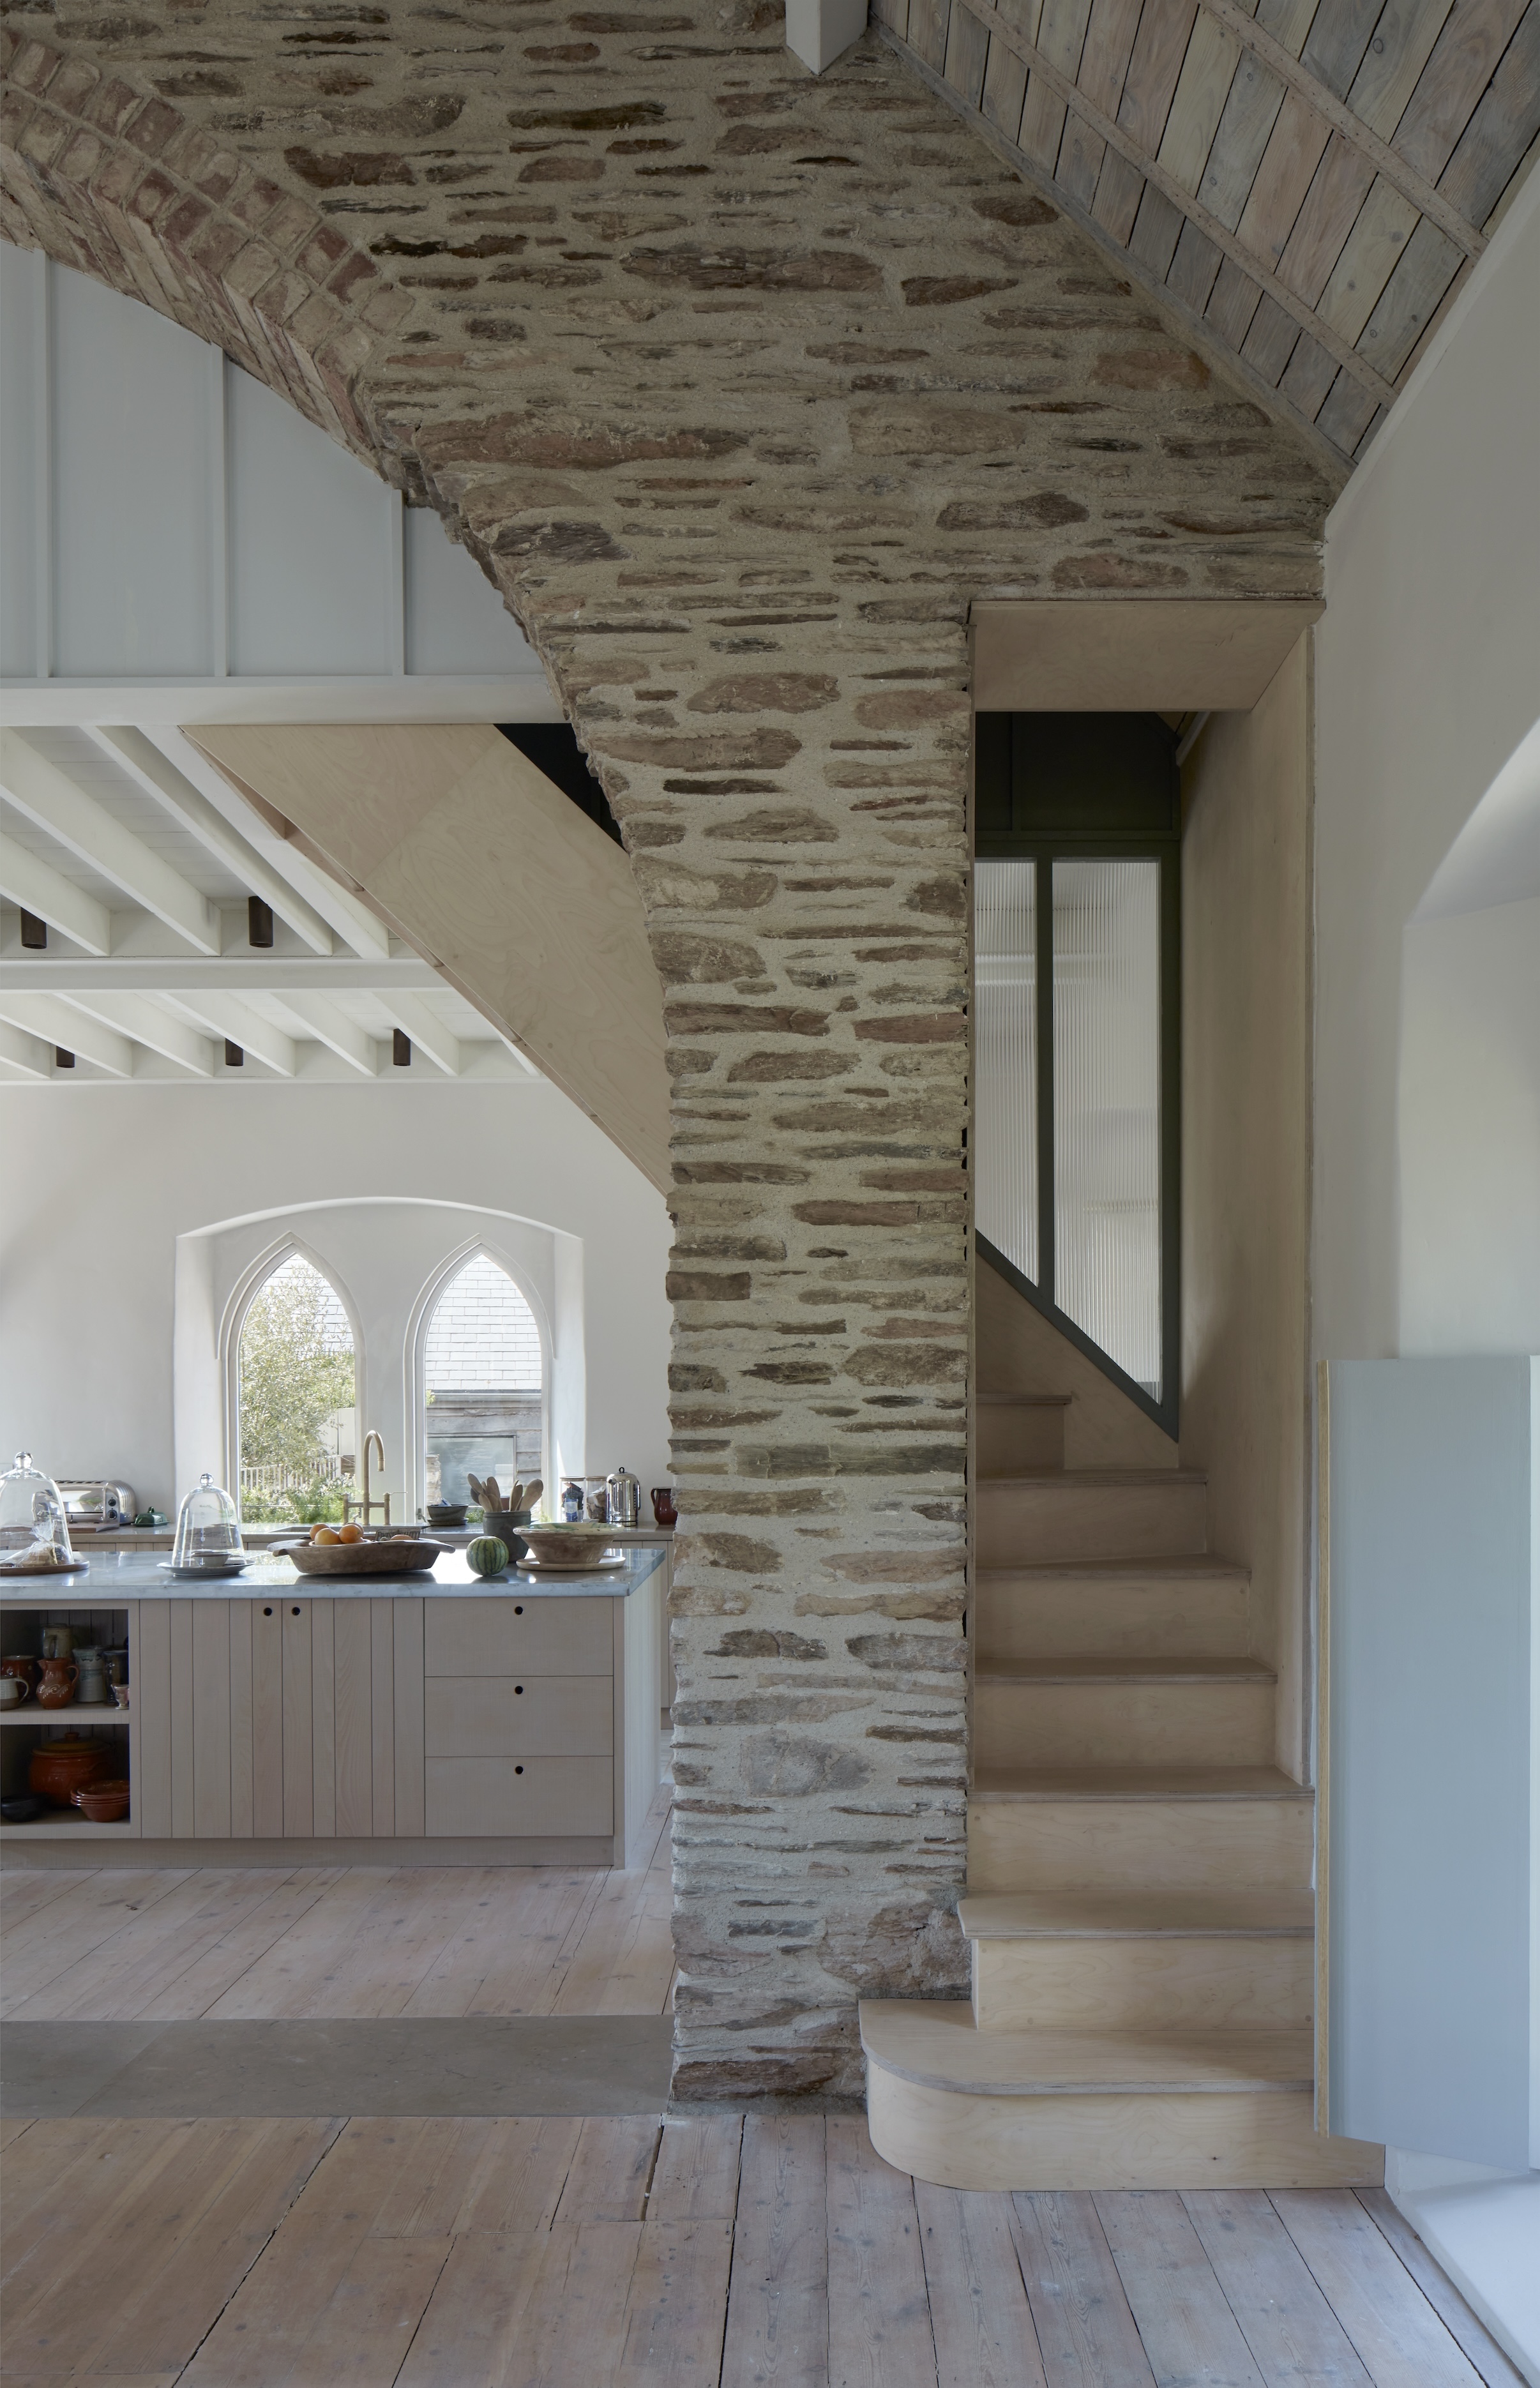 the architects tucked a mezzanine over the kitchen. the plywood staircase with  26